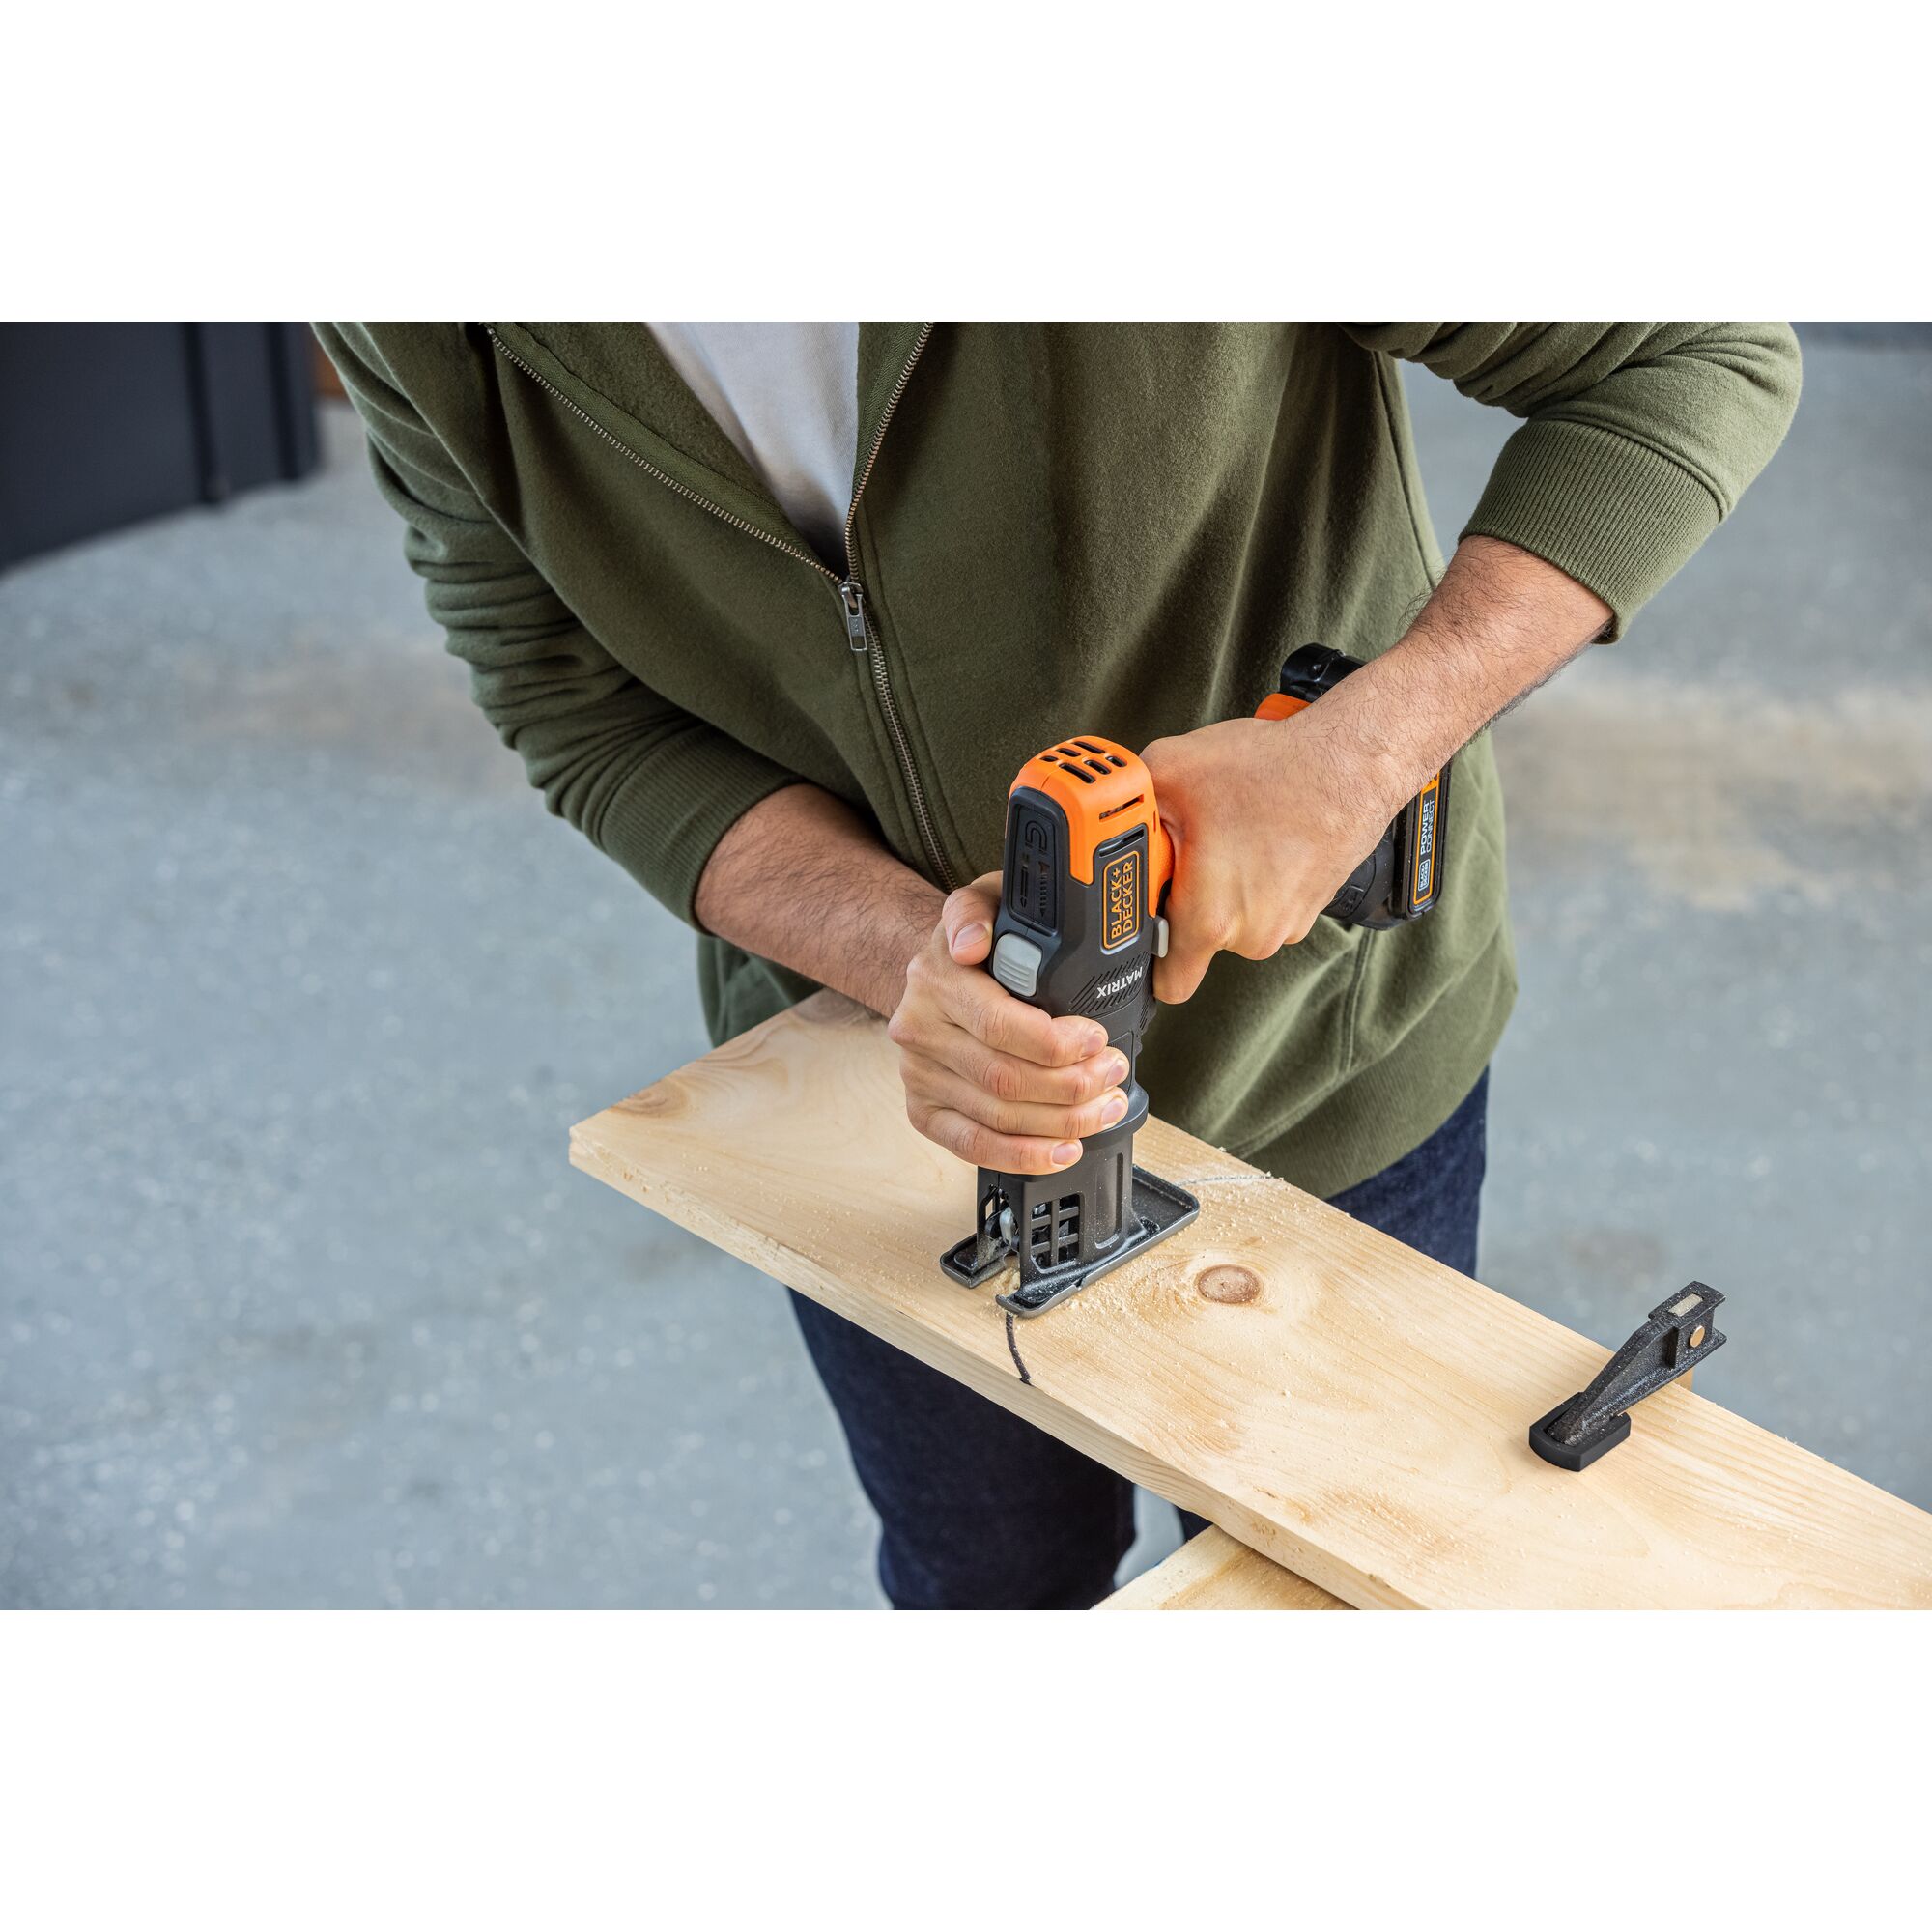 Person uses the BLACK+DECKER MATRIX jig saw attachment to cut curves in wood material